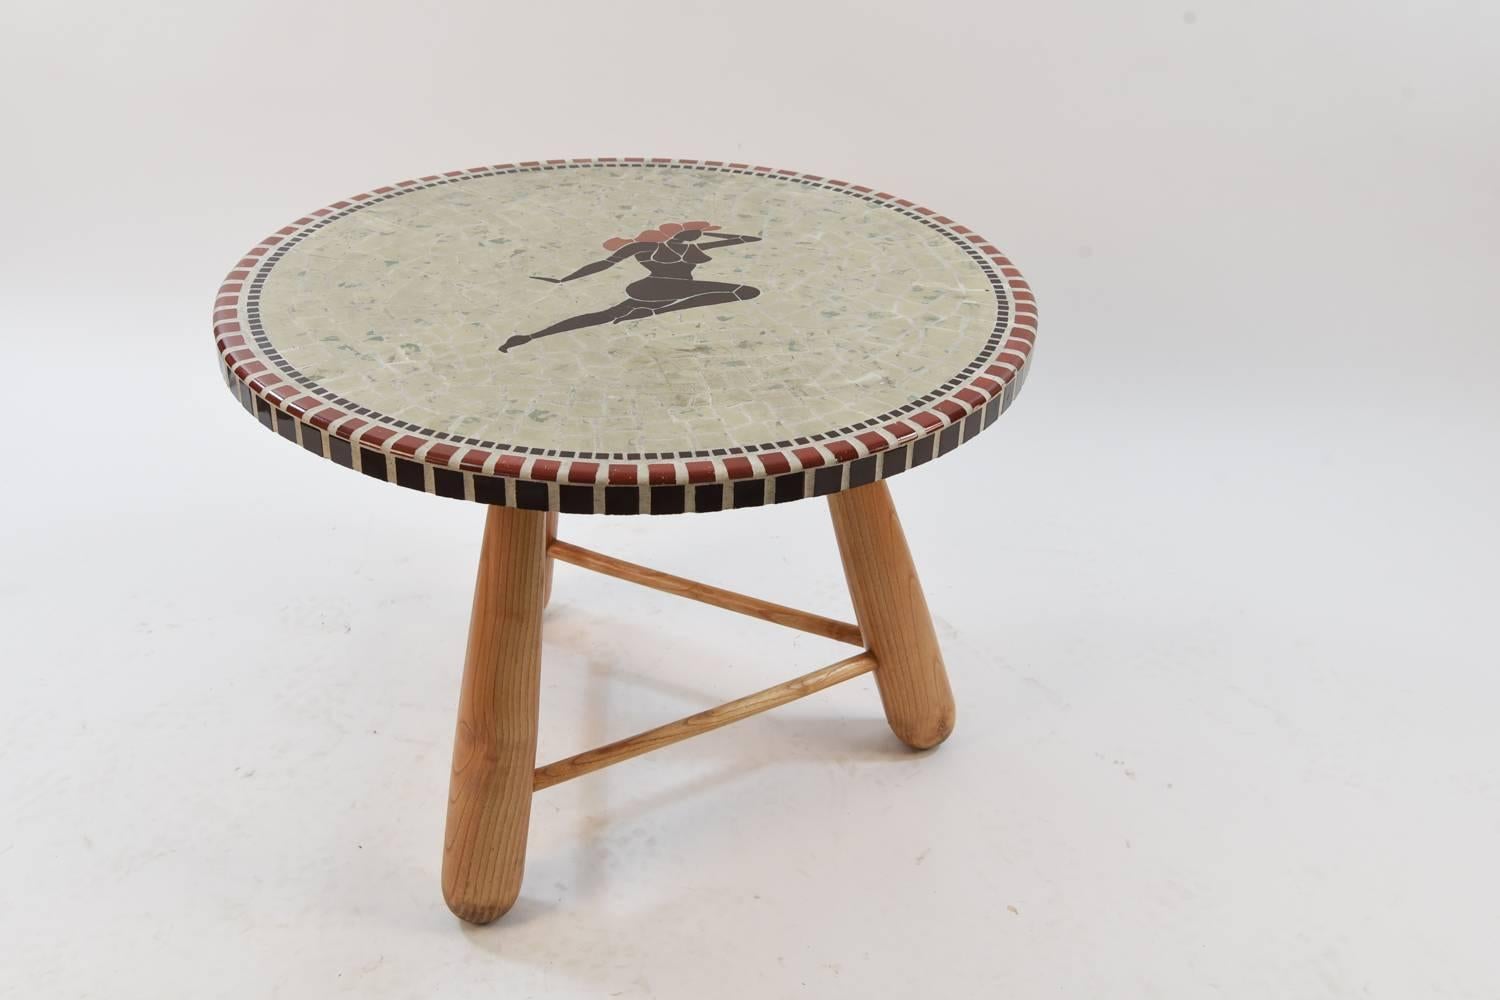 An amazing piece of art turned into a functional piece of furniture, this mosaic masterpiece features a bathing beauty designed in tile on the top. This coffee table is a wonderful example of Otto Færge’s work with the distinguishing baseball bat